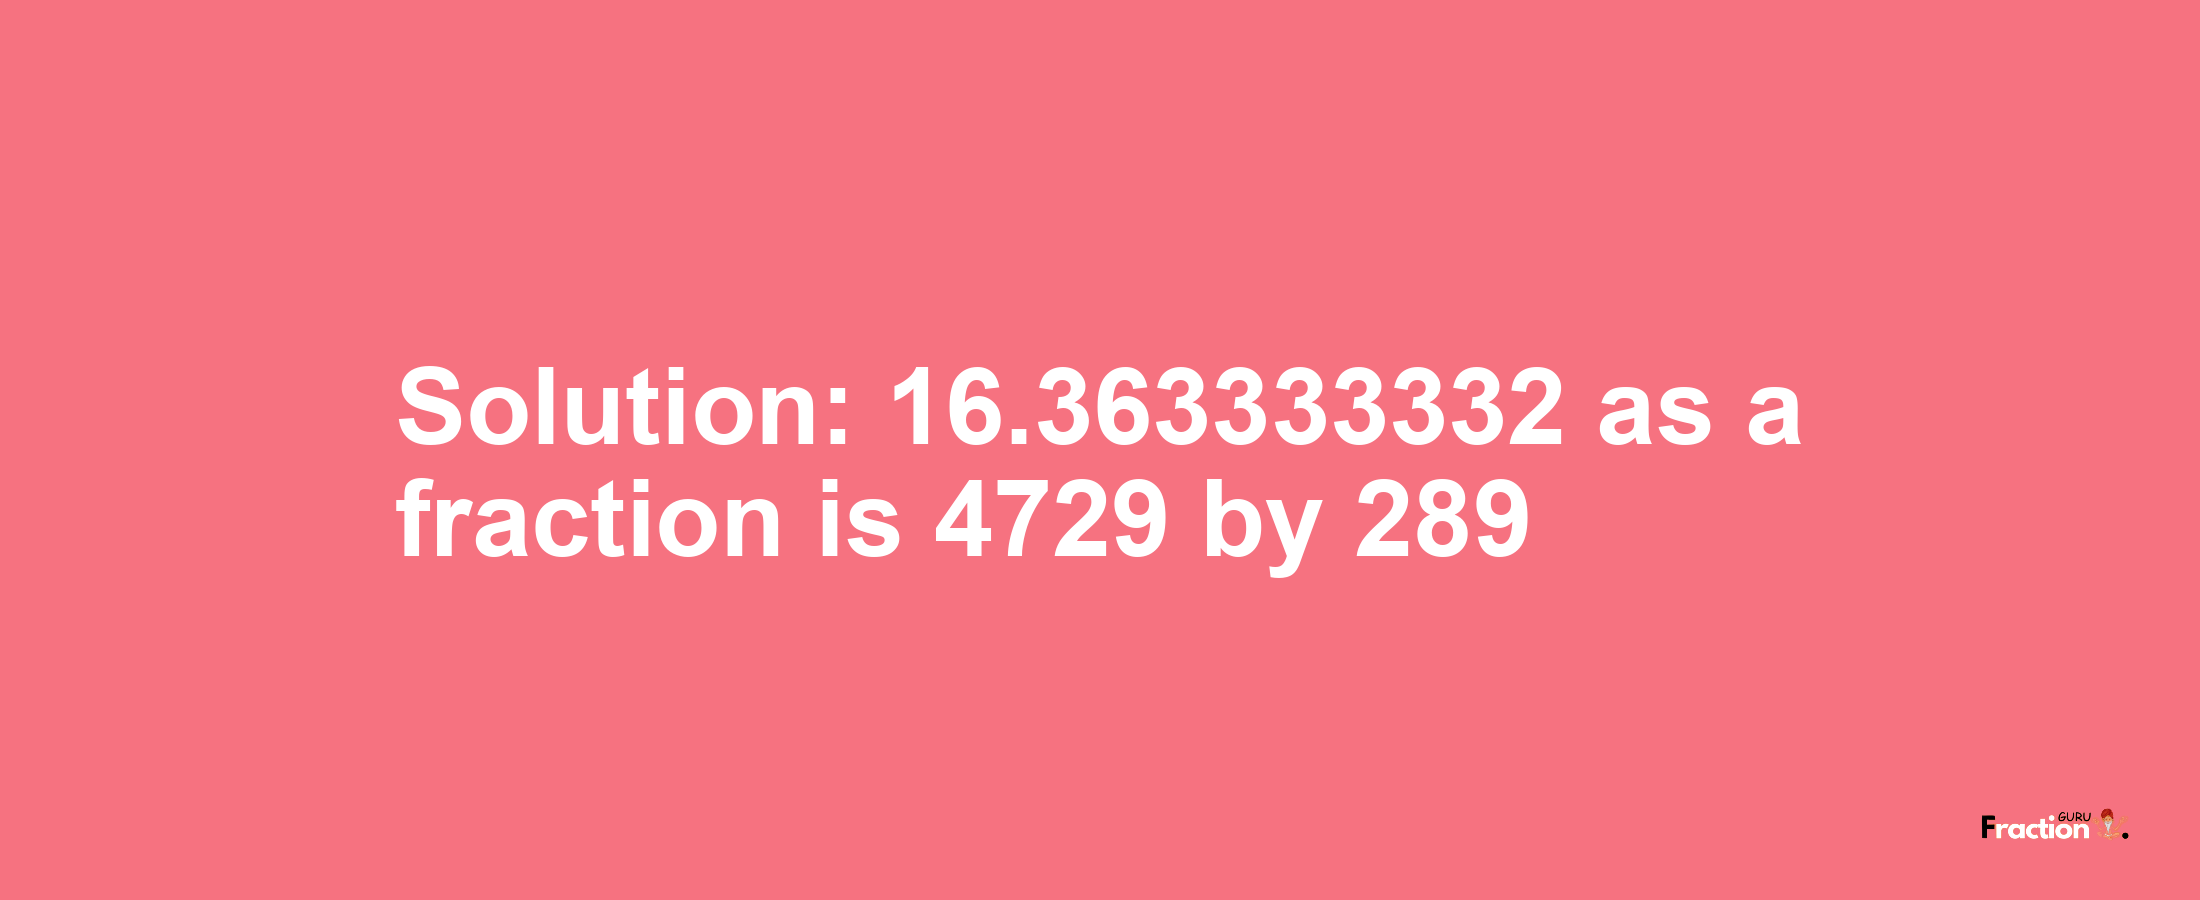 Solution:16.363333332 as a fraction is 4729/289